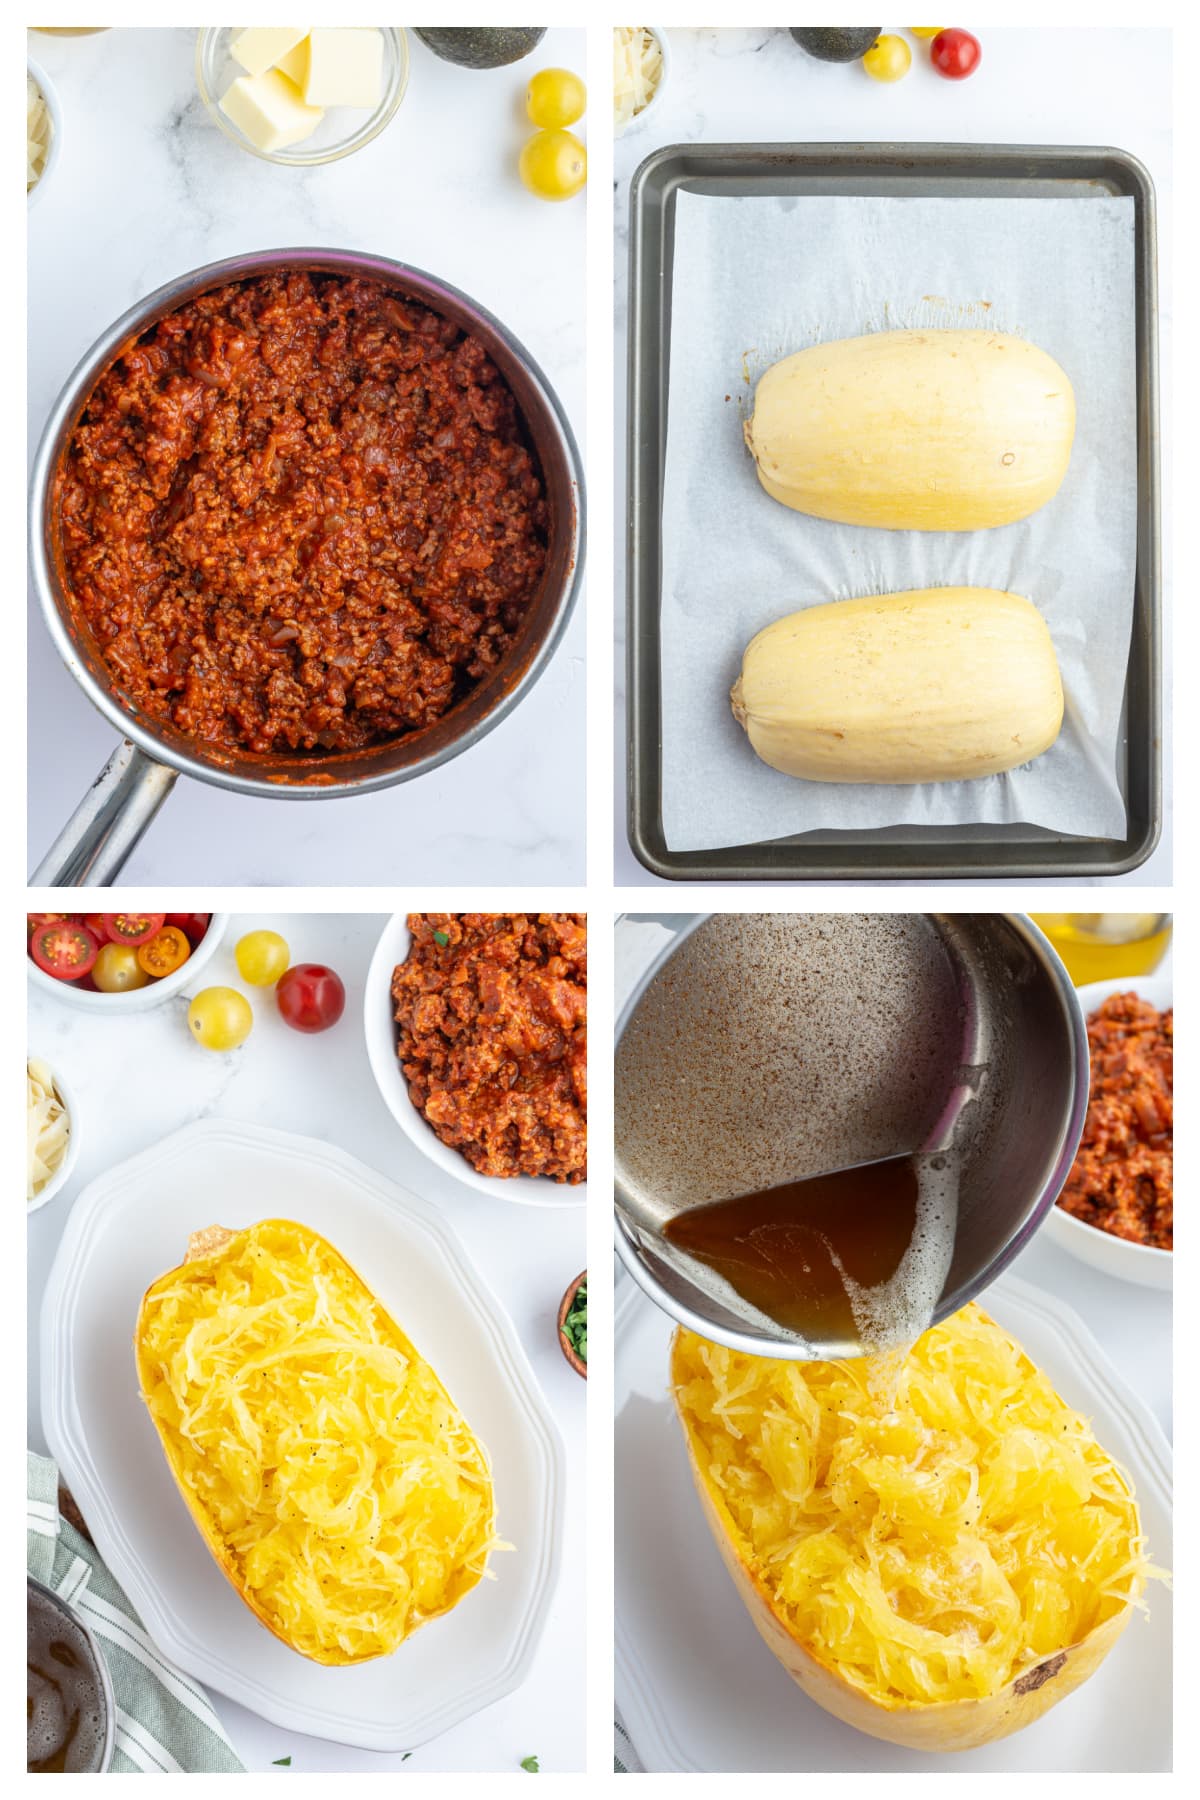 four photos showing making spaghetti squash with spicy meat sauce